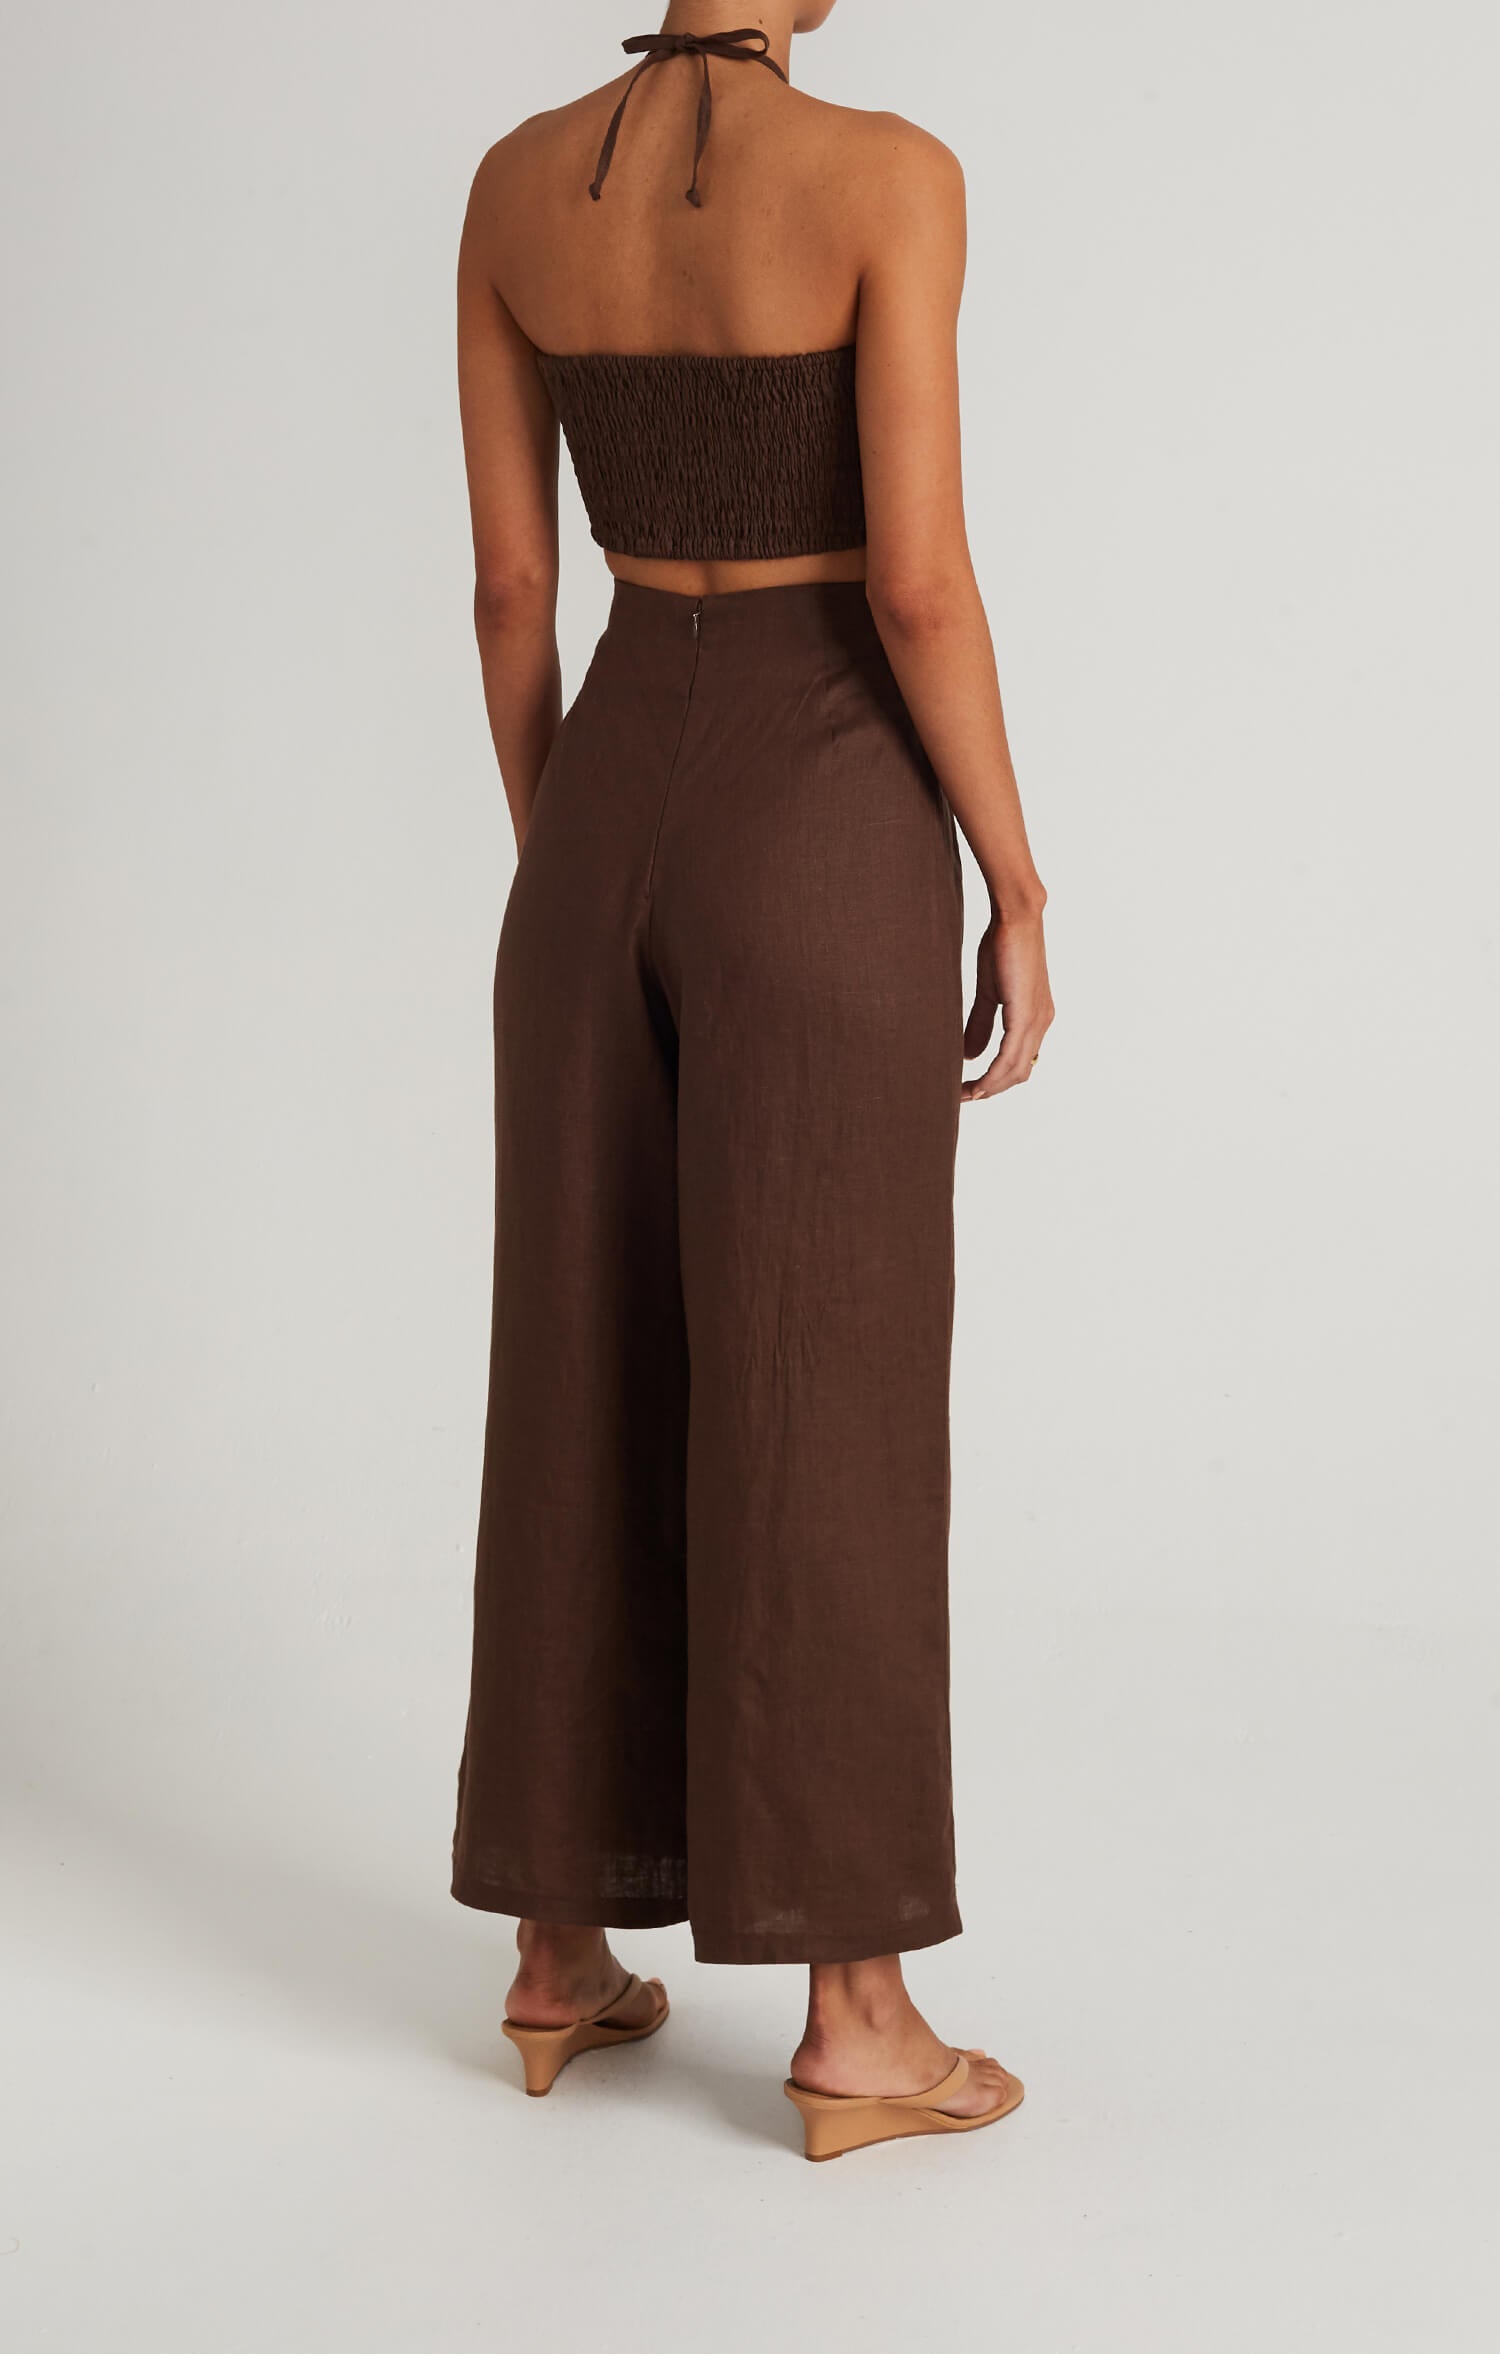 Faithfull The Brand Cyprus Top in Plain Chocolate from The New Trend